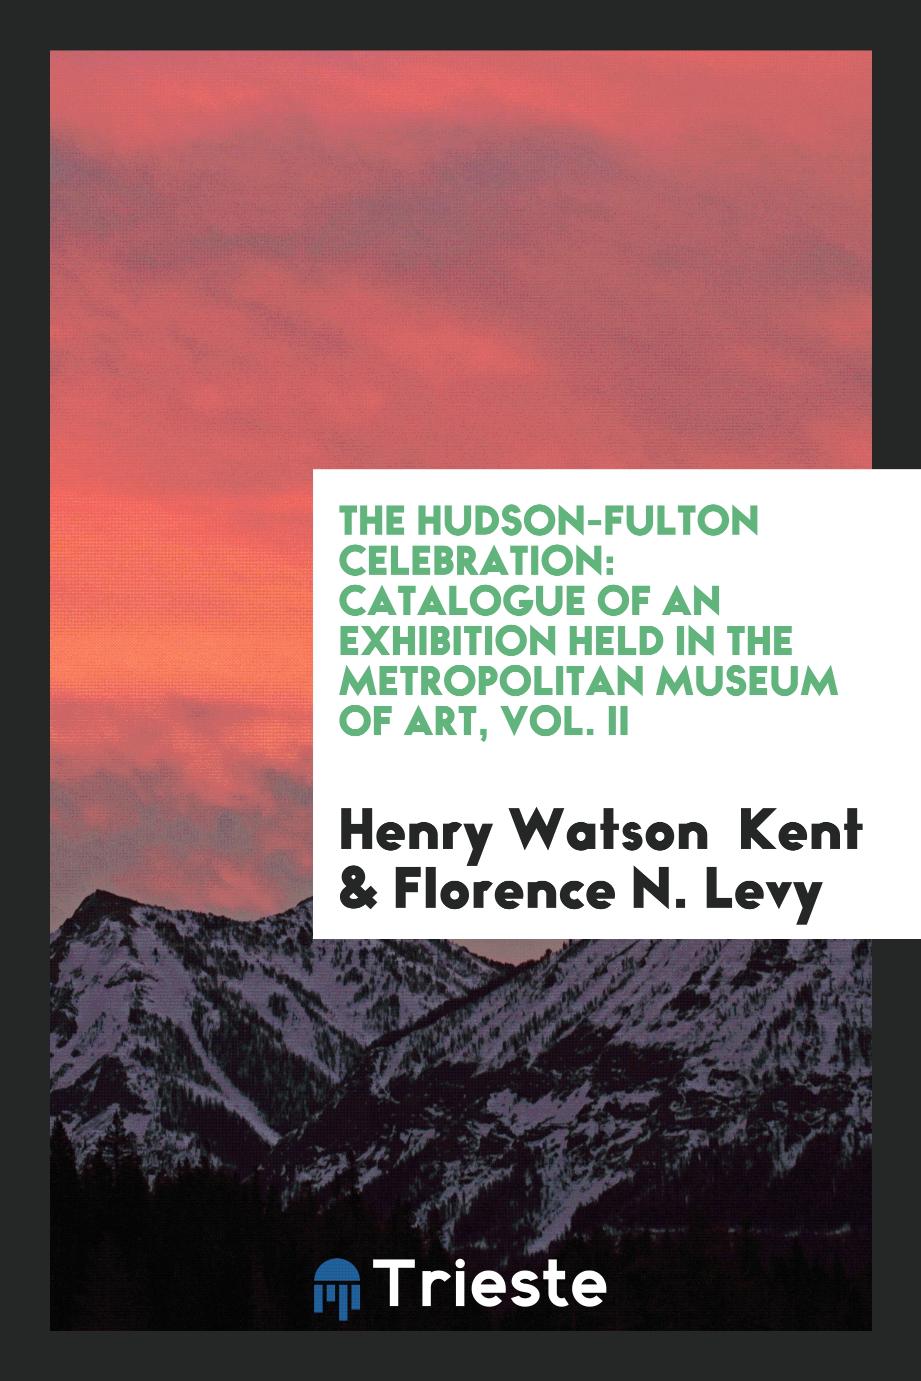 The Hudson-Fulton Celebration: Catalogue of an Exhibition Held in the Metropolitan Museum of Art, Vol. II